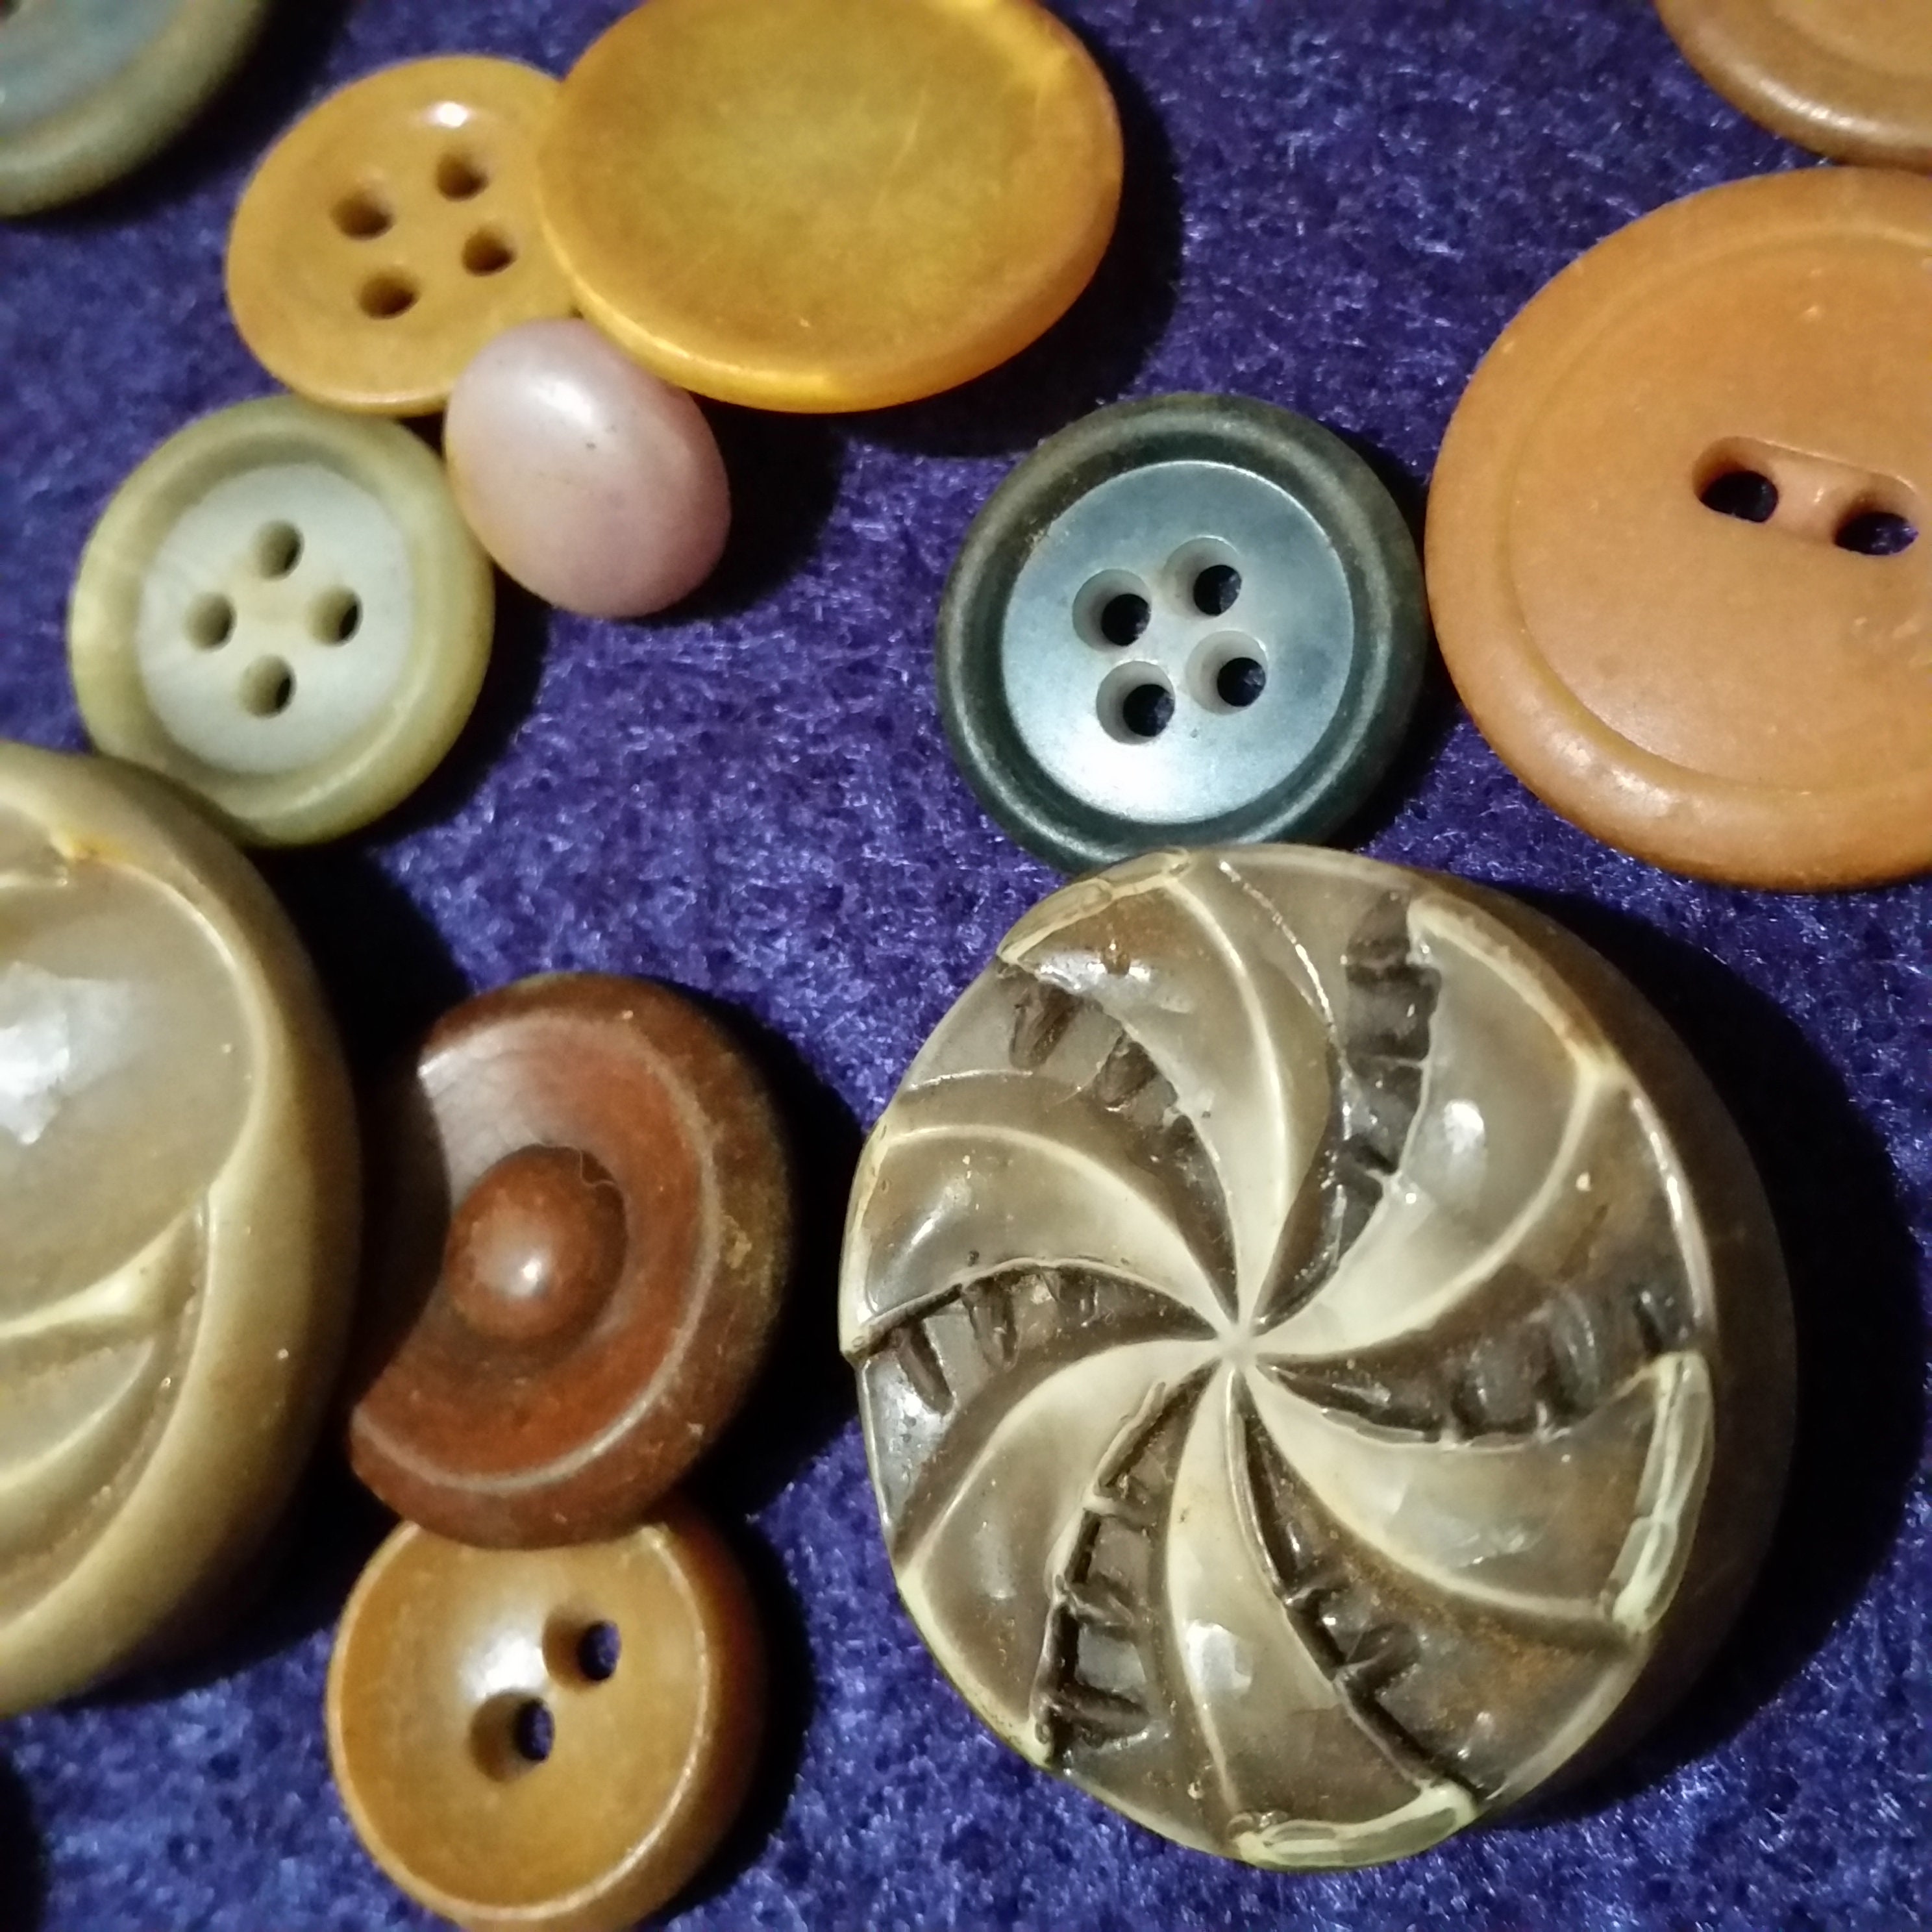 Lot 100 Mixed Assorted BROWN Vintage & Newer Wholesale Bulk Buttons Craft  Home Schooling Learning Kids Crafts Free Shipping 